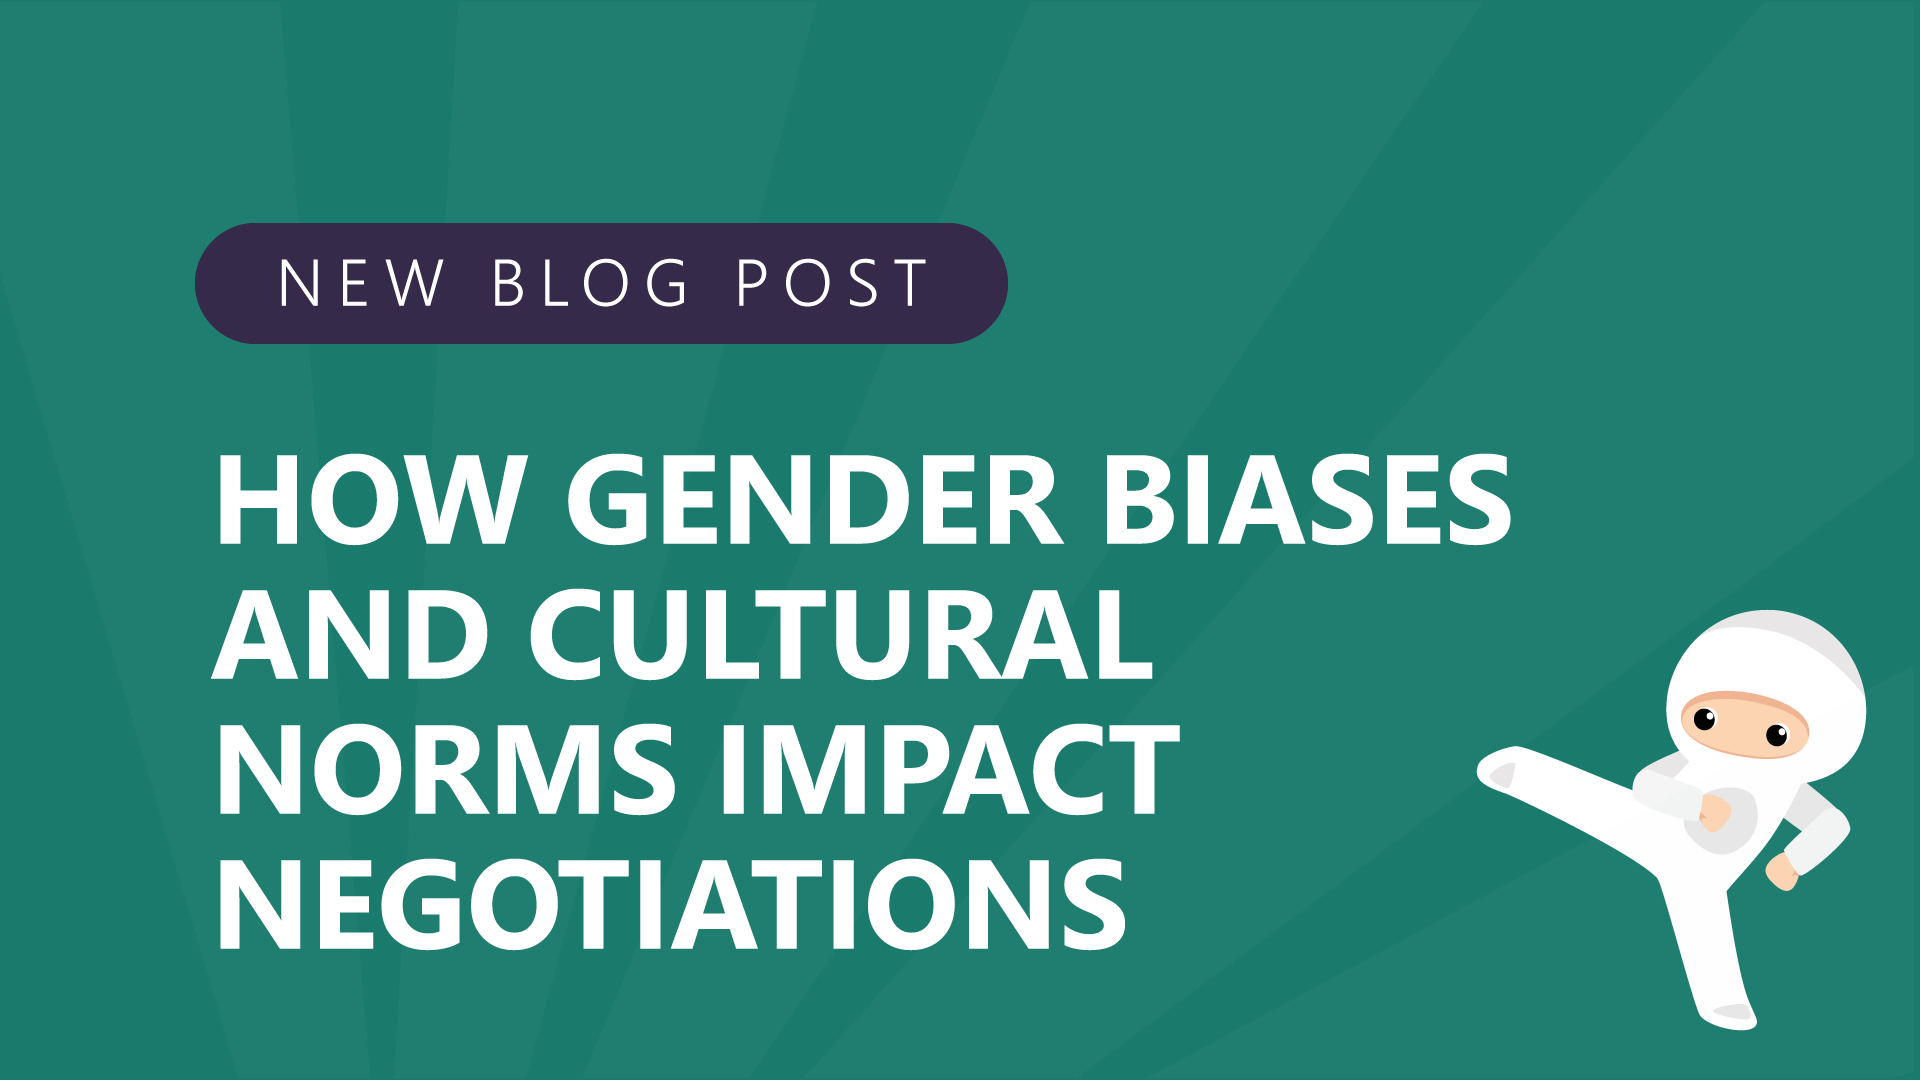 How-Gender-Biases-and-Cultural-Norms-Impact-Negotiations.jpg